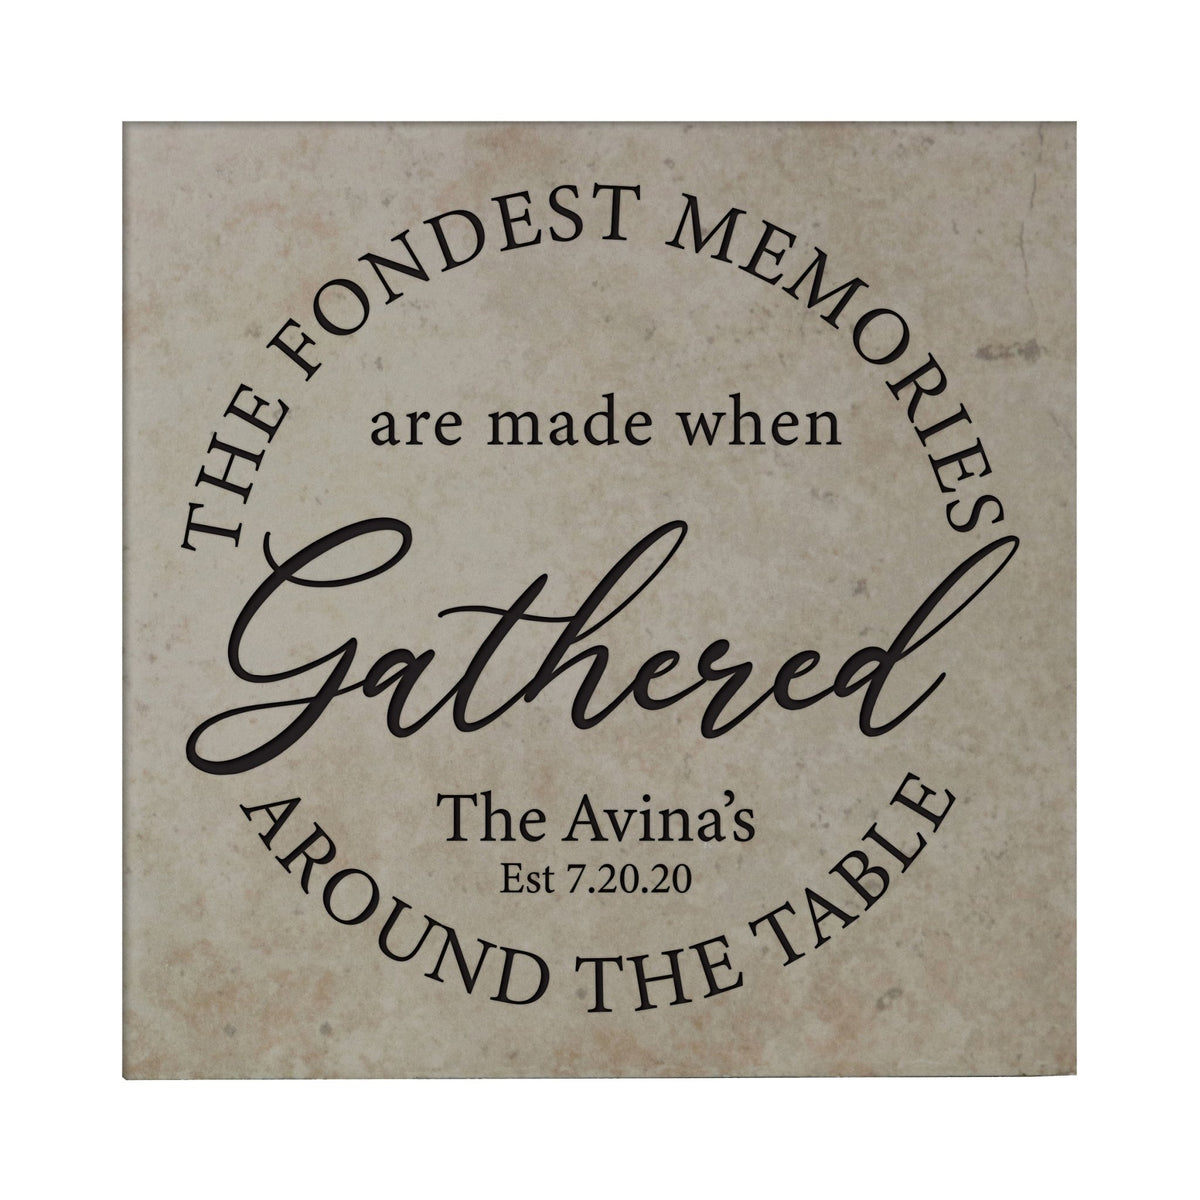 Personalized Ceramic Trivet with Inspirational verse 5.75in (The Fondest Memories) - LifeSong Milestones